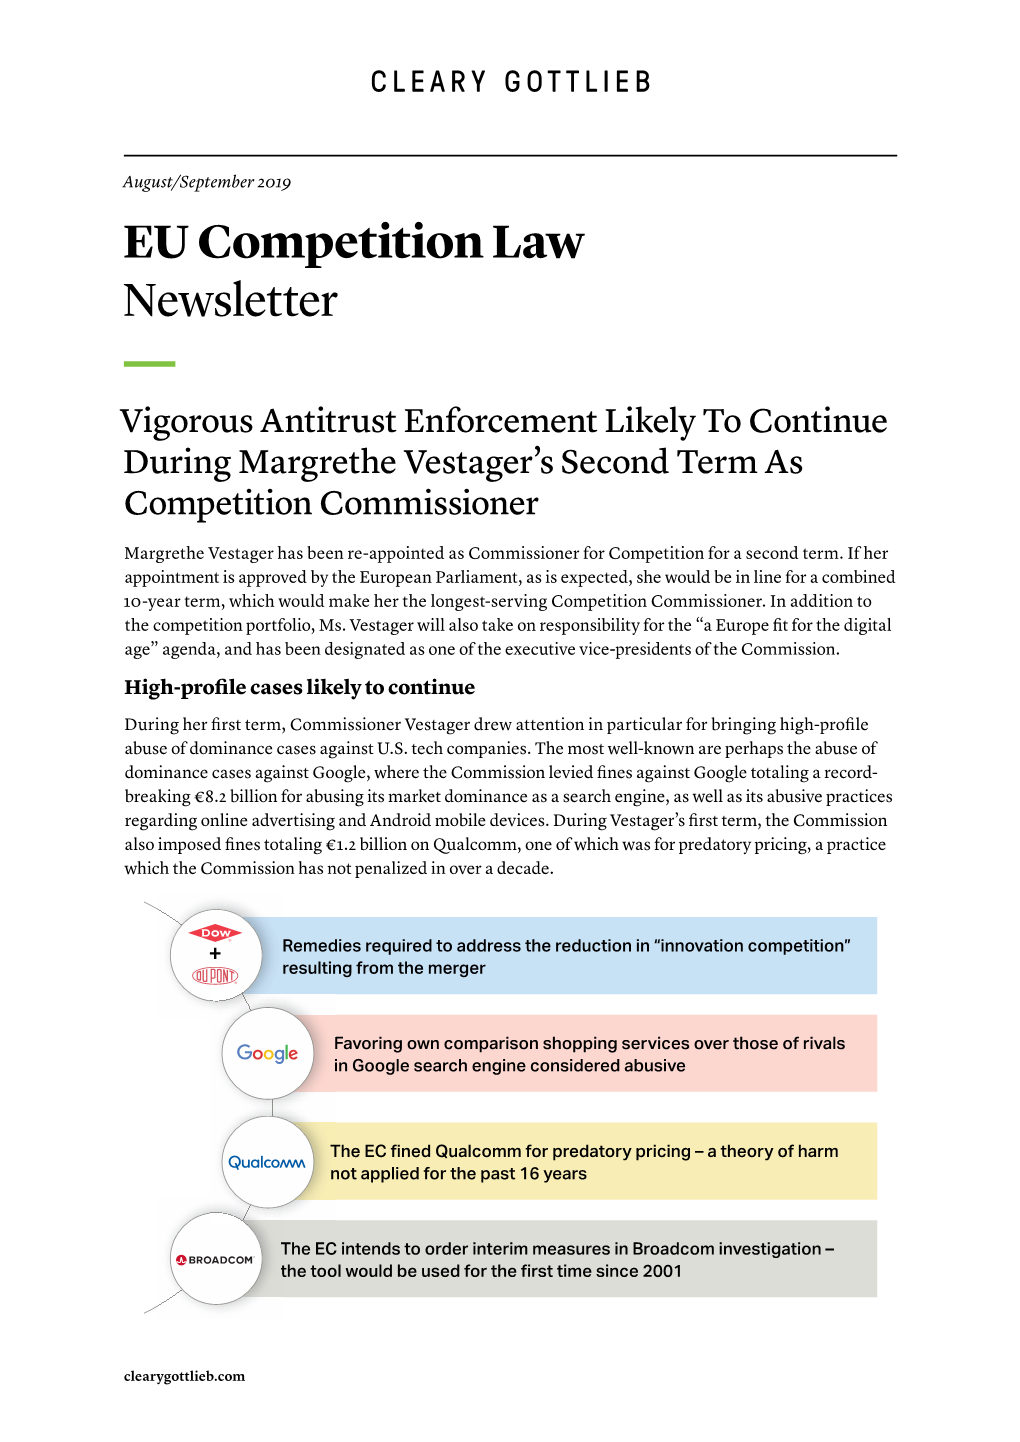 EU Competition Law Newsletter — Vigorous Antitrust Enforcement Likely to Continue During Margrethe Vestager’S Second Term As Competition Commissioner